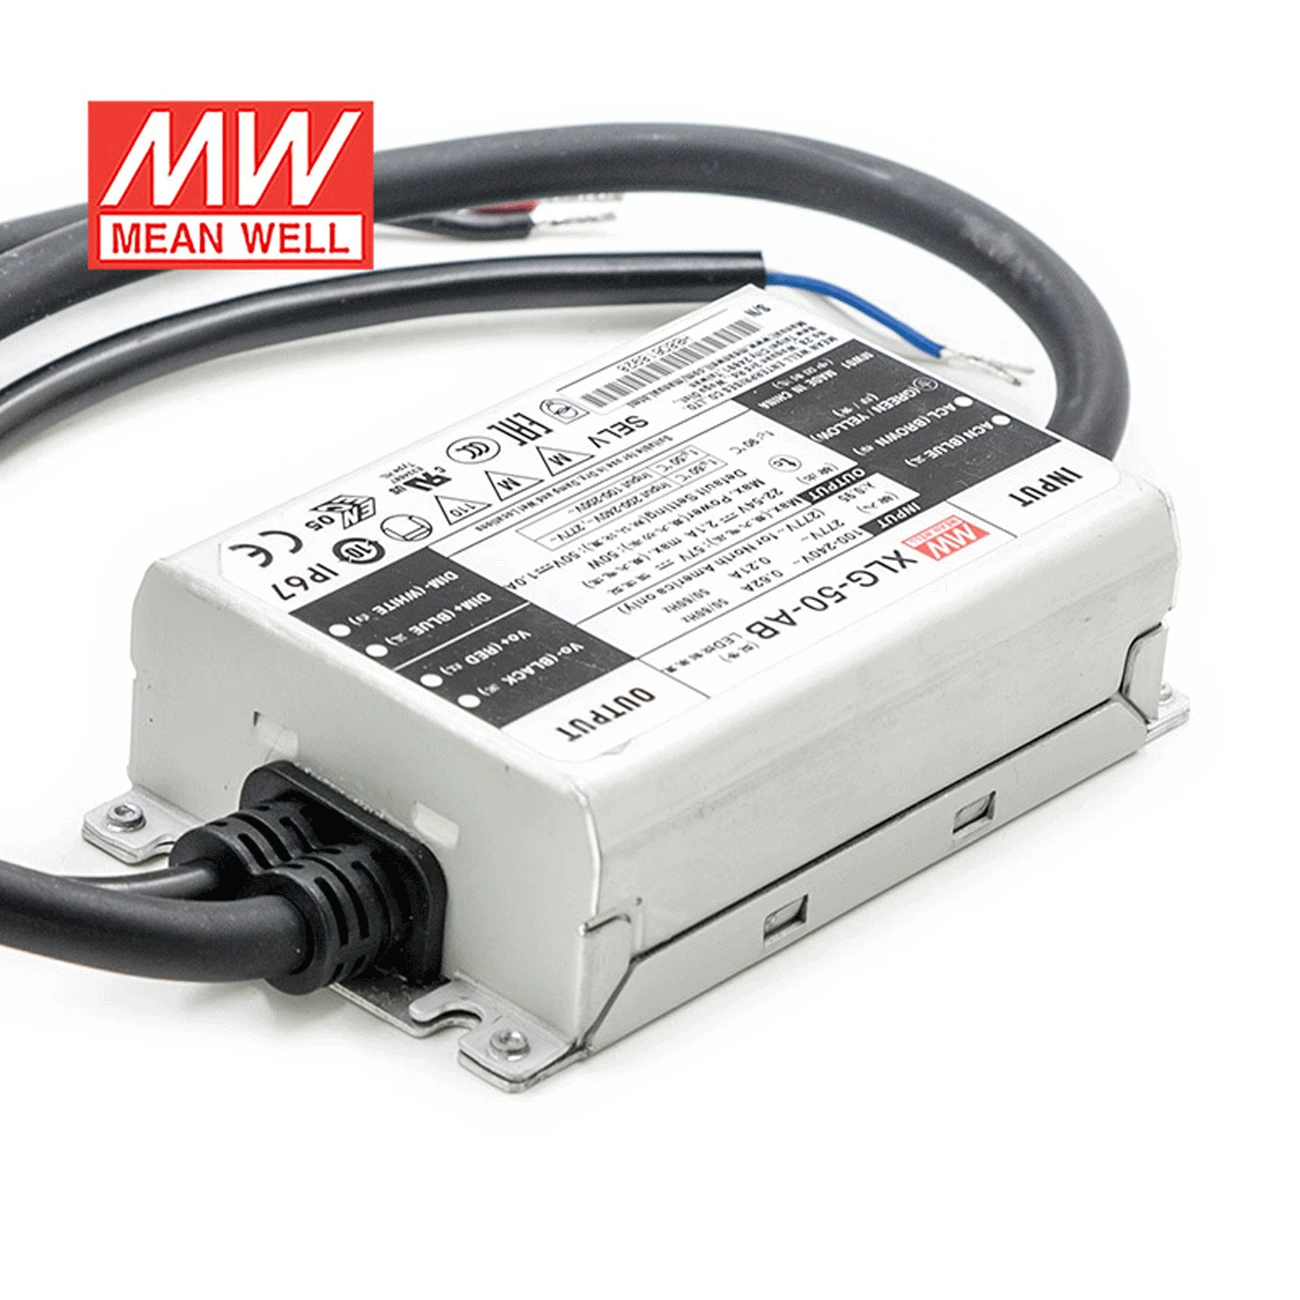 

transmit MEAN WELL Taiwan XLG-50-A/AB switching power supply 50W constant power with PFC three-in-one dimming LED driver